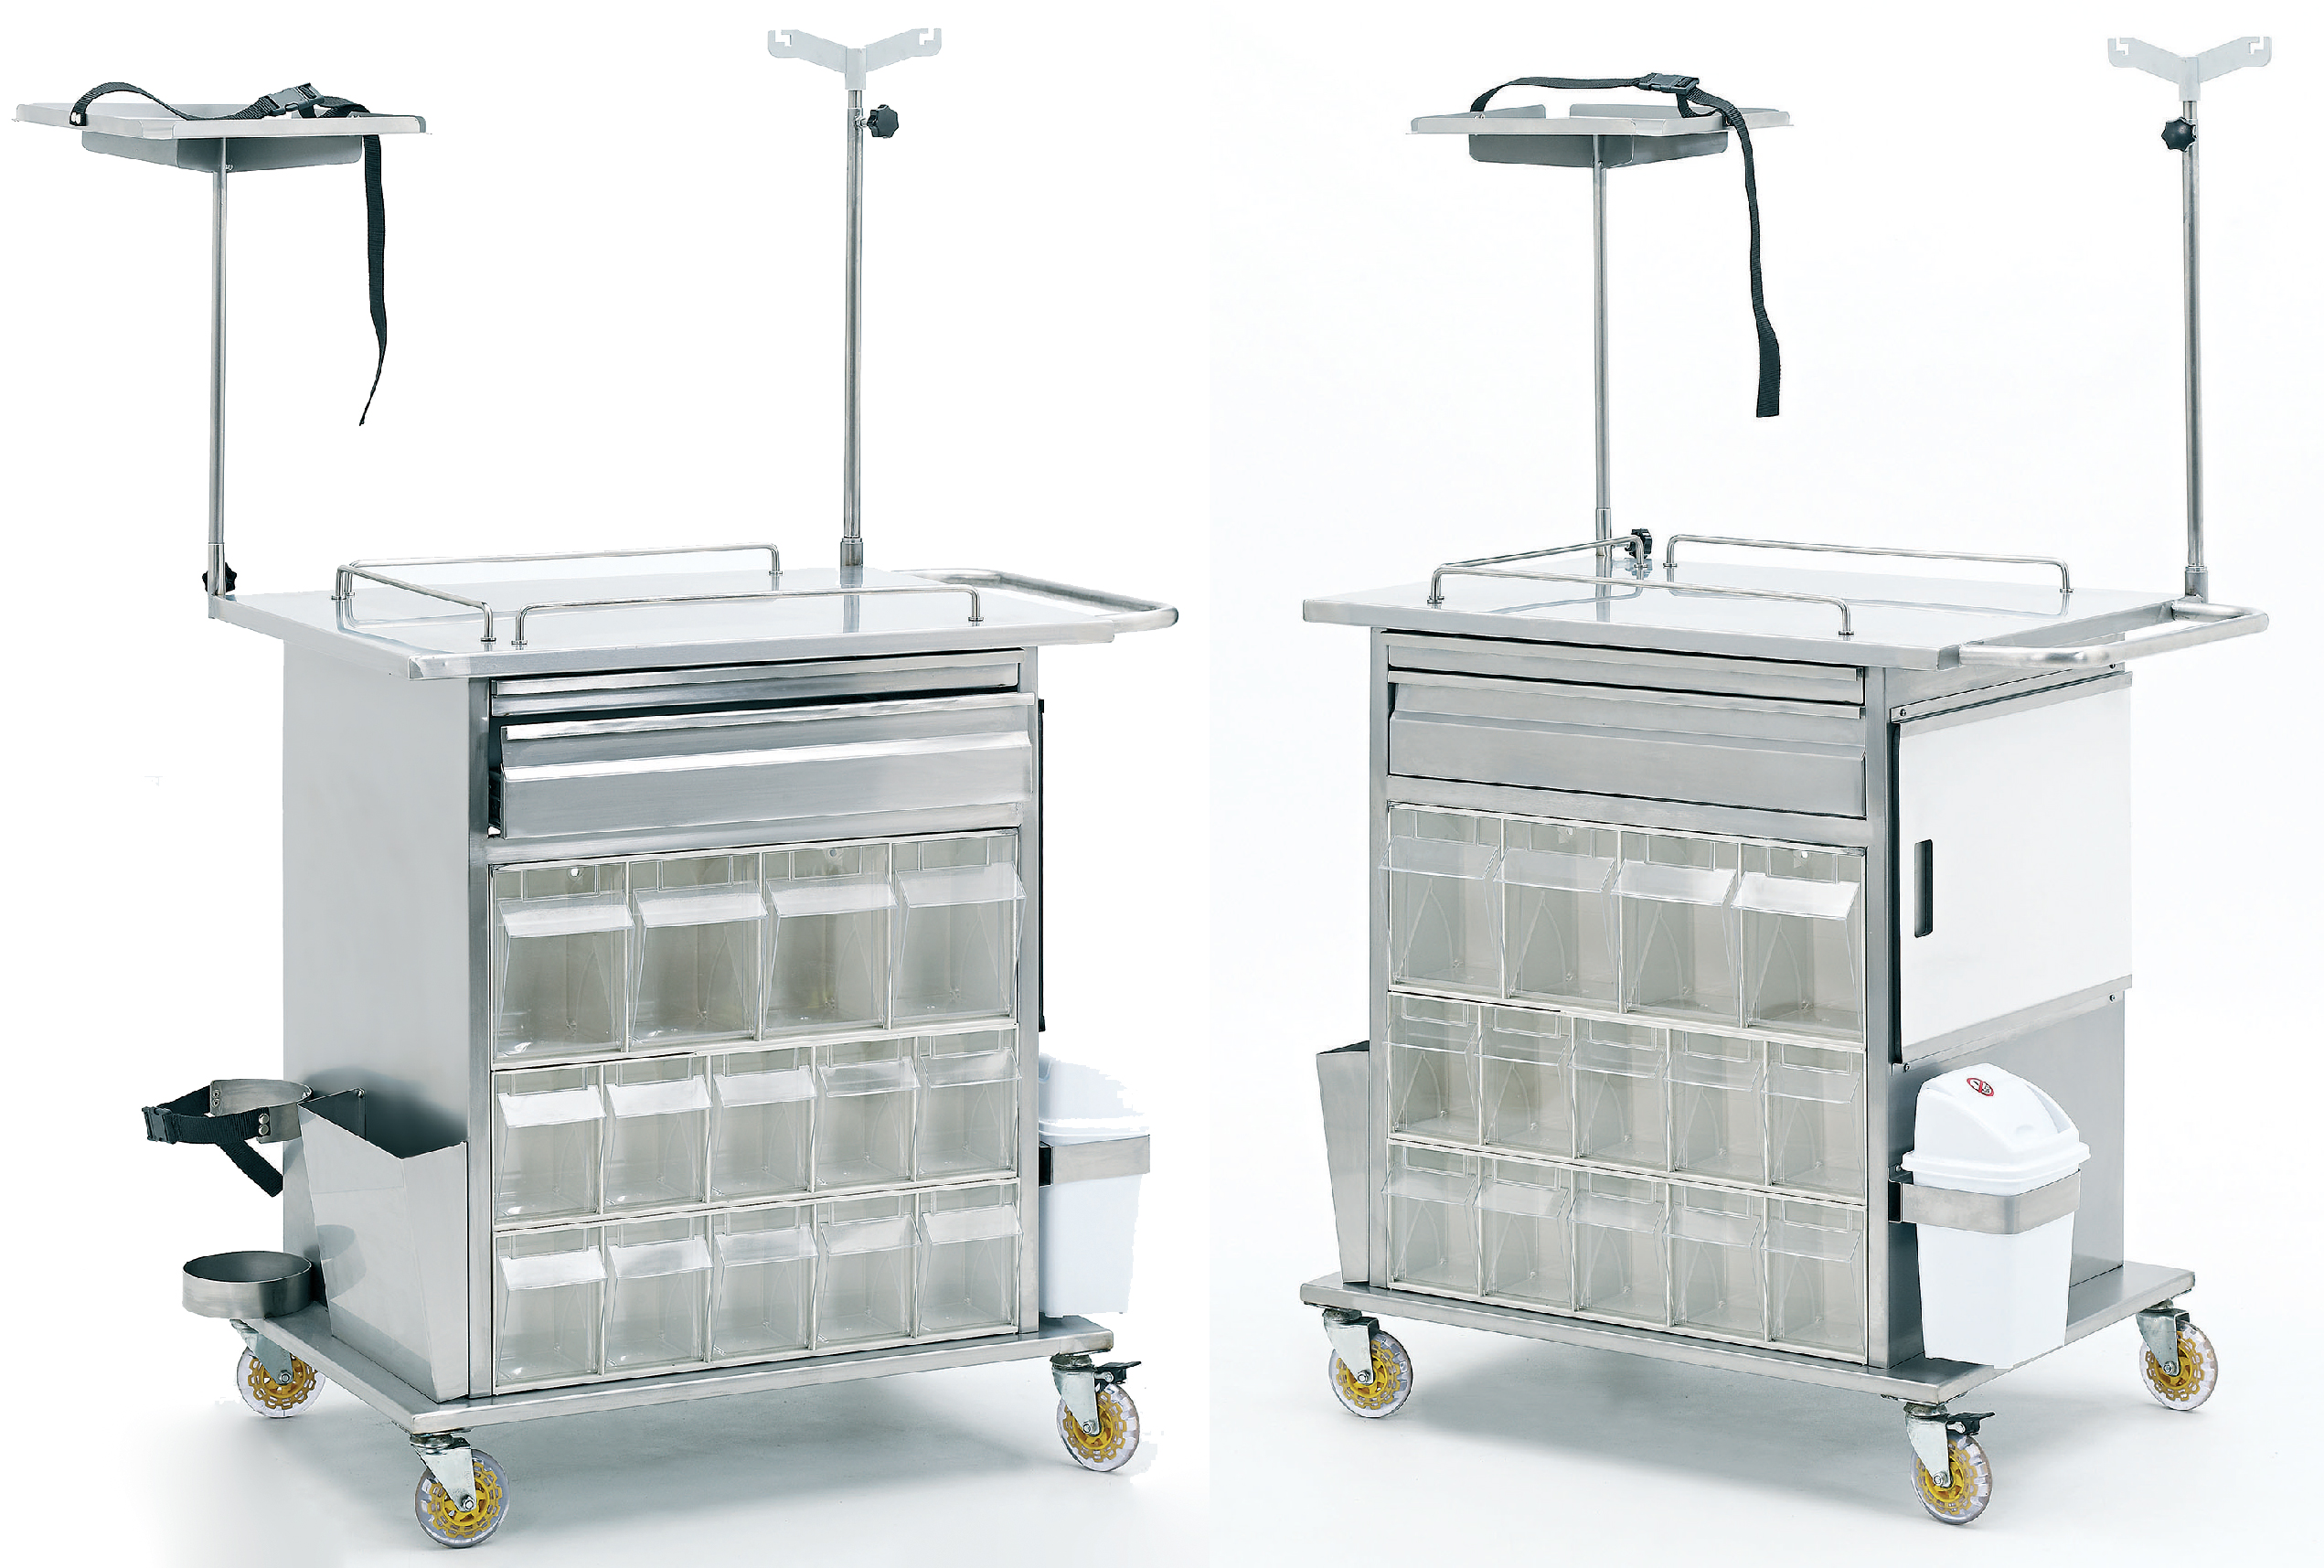 EMERGENCY AND MEDICINE-TREATMENT CART